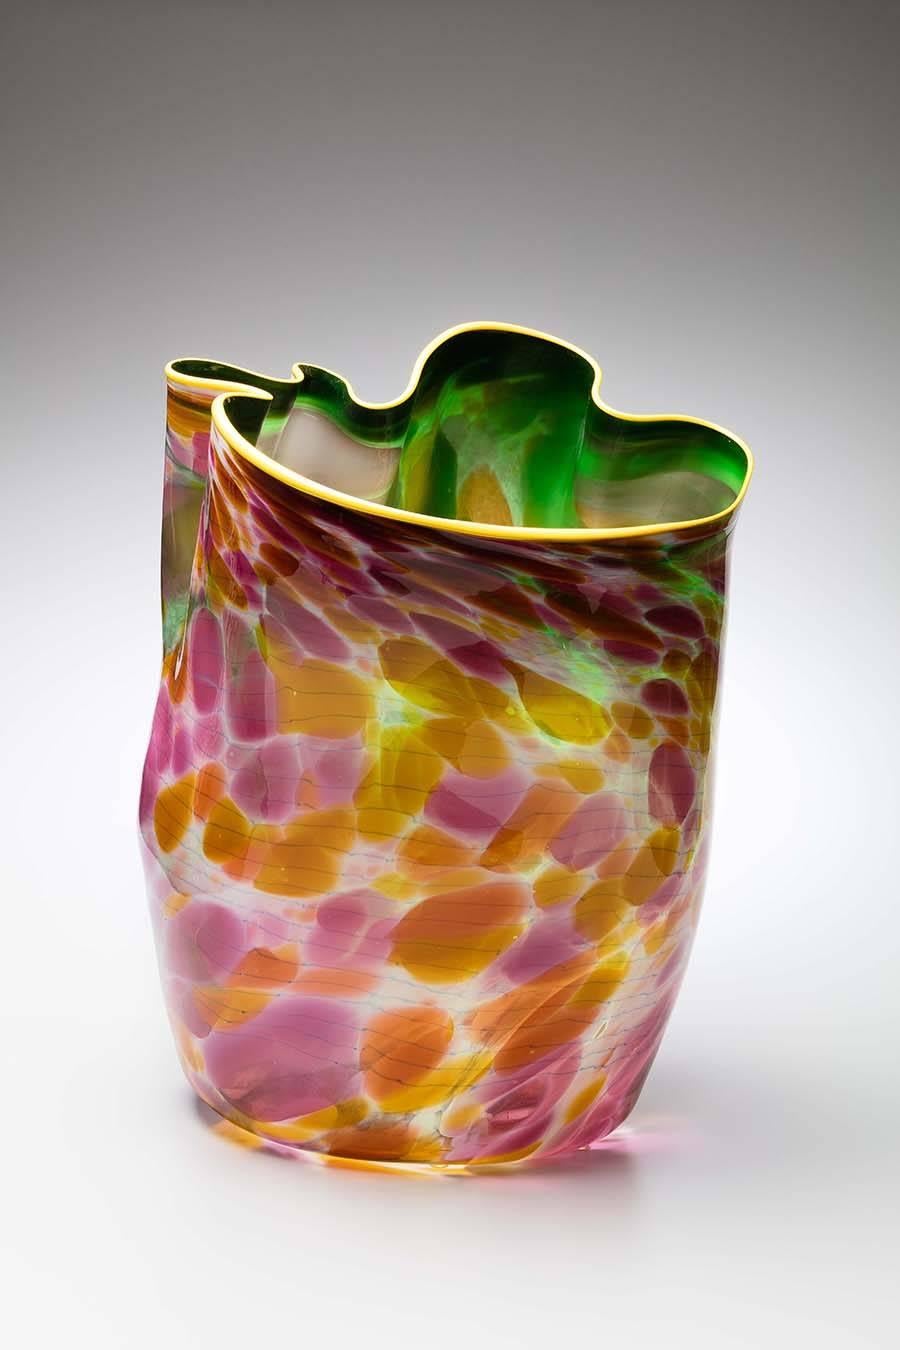 American Dale Chihuly (b. 1941) blown glass massive bowl basket, dated 1988.

This organic-form bowl basket is of a desirable early date, and includes an incredible array of vivid colors. The interior appears to be a vivid emerald green under